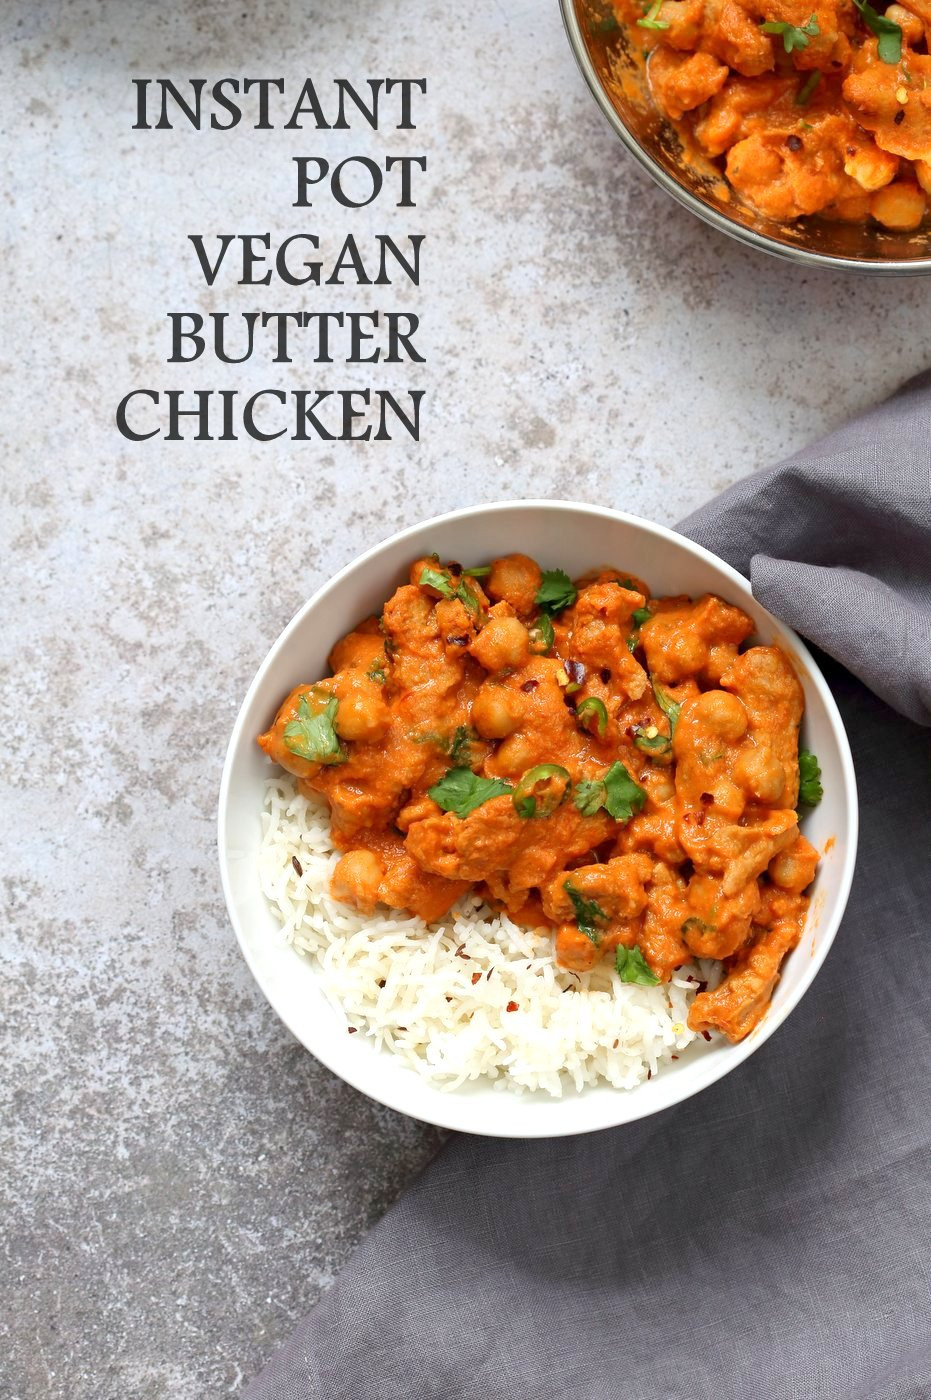 Instant Pot Vegetarian Indian Recipes
 Instant Pot Vegan Butter Chicken with Soy Curls